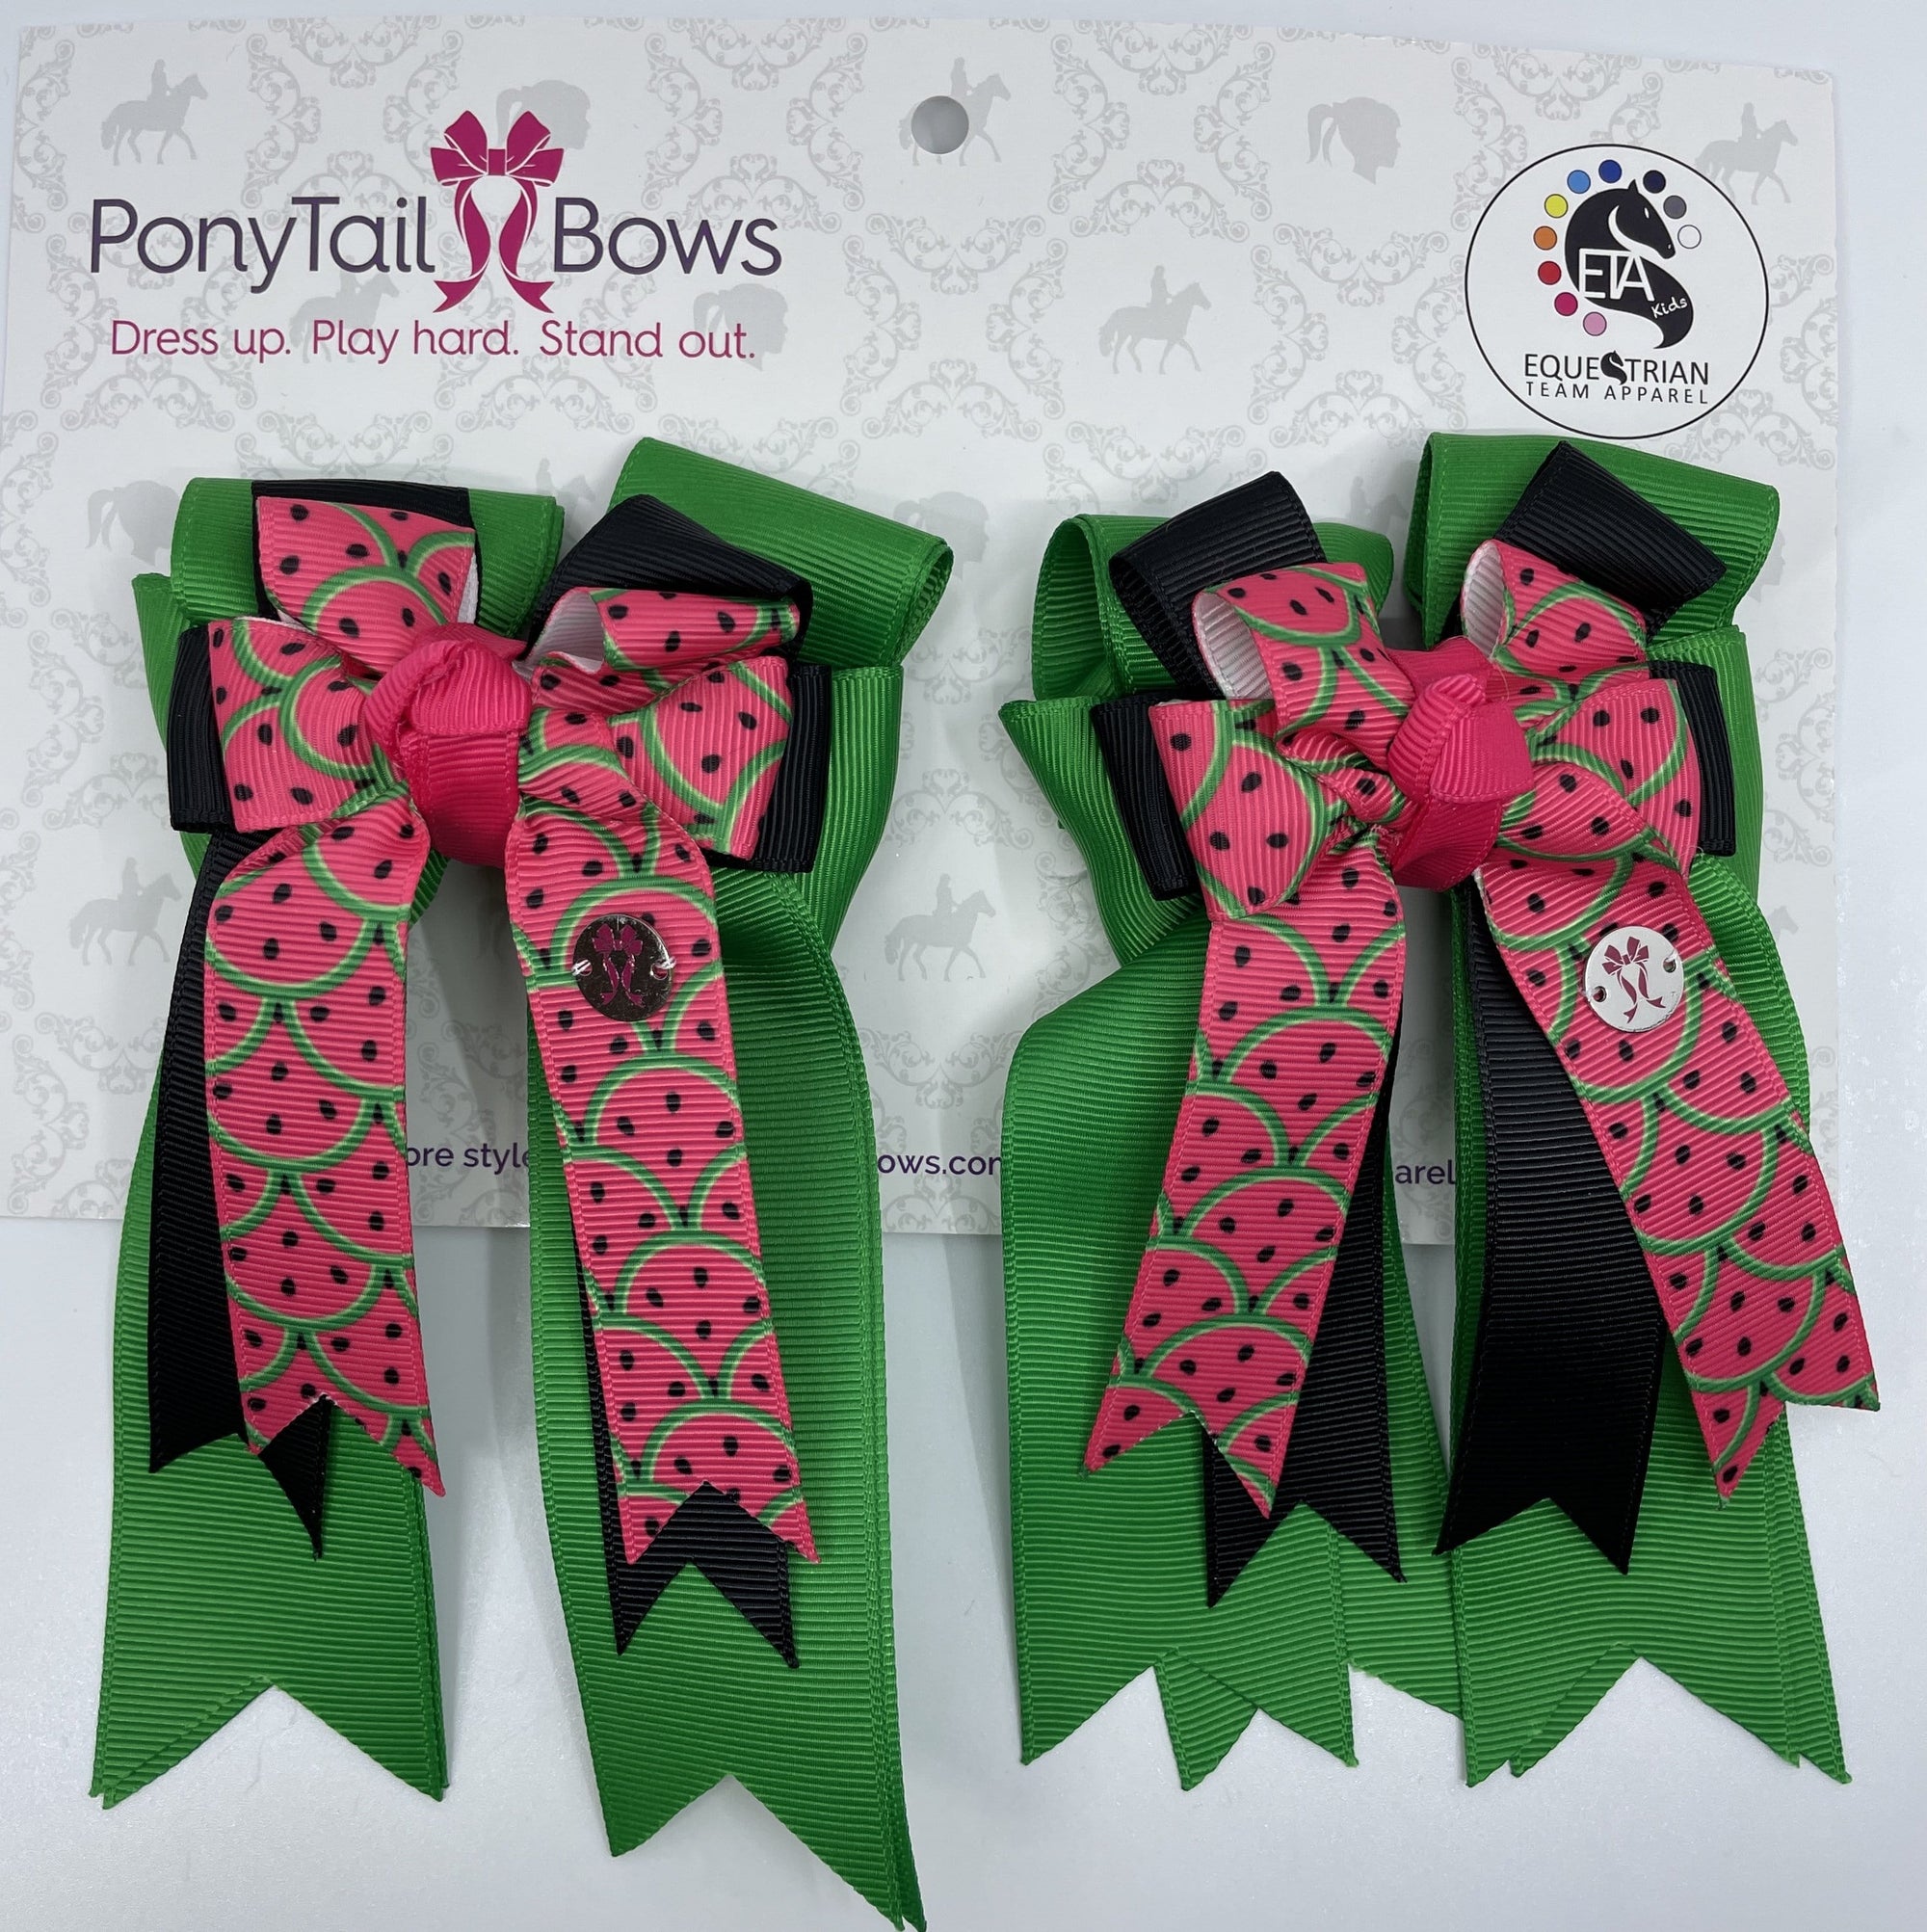 PonyTail Bows 3" Tails Watermelon Sugar/Green Base PonyTail Bows equestrian team apparel online tack store mobile tack store custom farm apparel custom show stable clothing equestrian lifestyle horse show clothing riding clothes PonyTail Bows | Equestrian Hair Accessories horses equestrian tack store